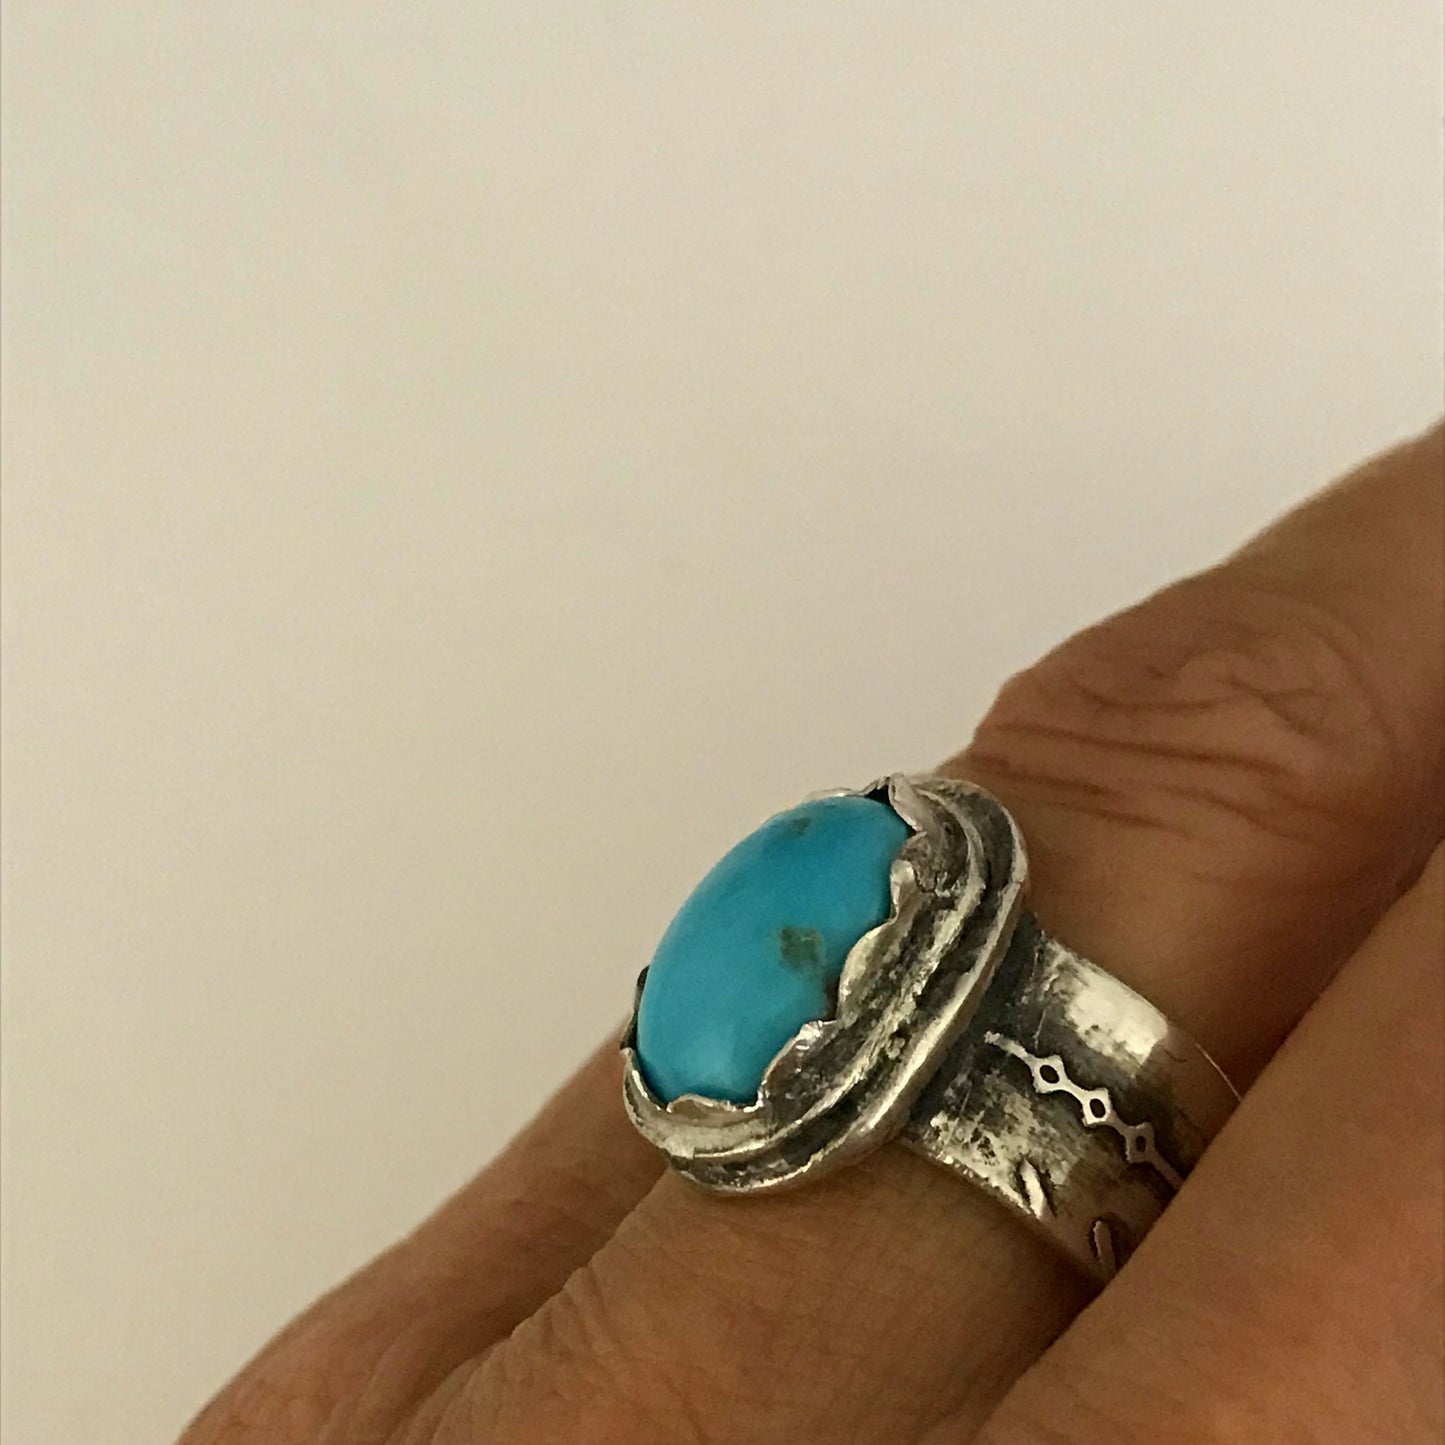 Sleeping Beauty Turquoise Sterling Silver US Size 7 Ring, This handcrafted sterling silver ring with south western style arrows texture featuring pretty sleeping beauty turquoise in a bezel setting. This Ring is made of pure .950 sterling silver and hallmarked as it.  - CosmicDeva